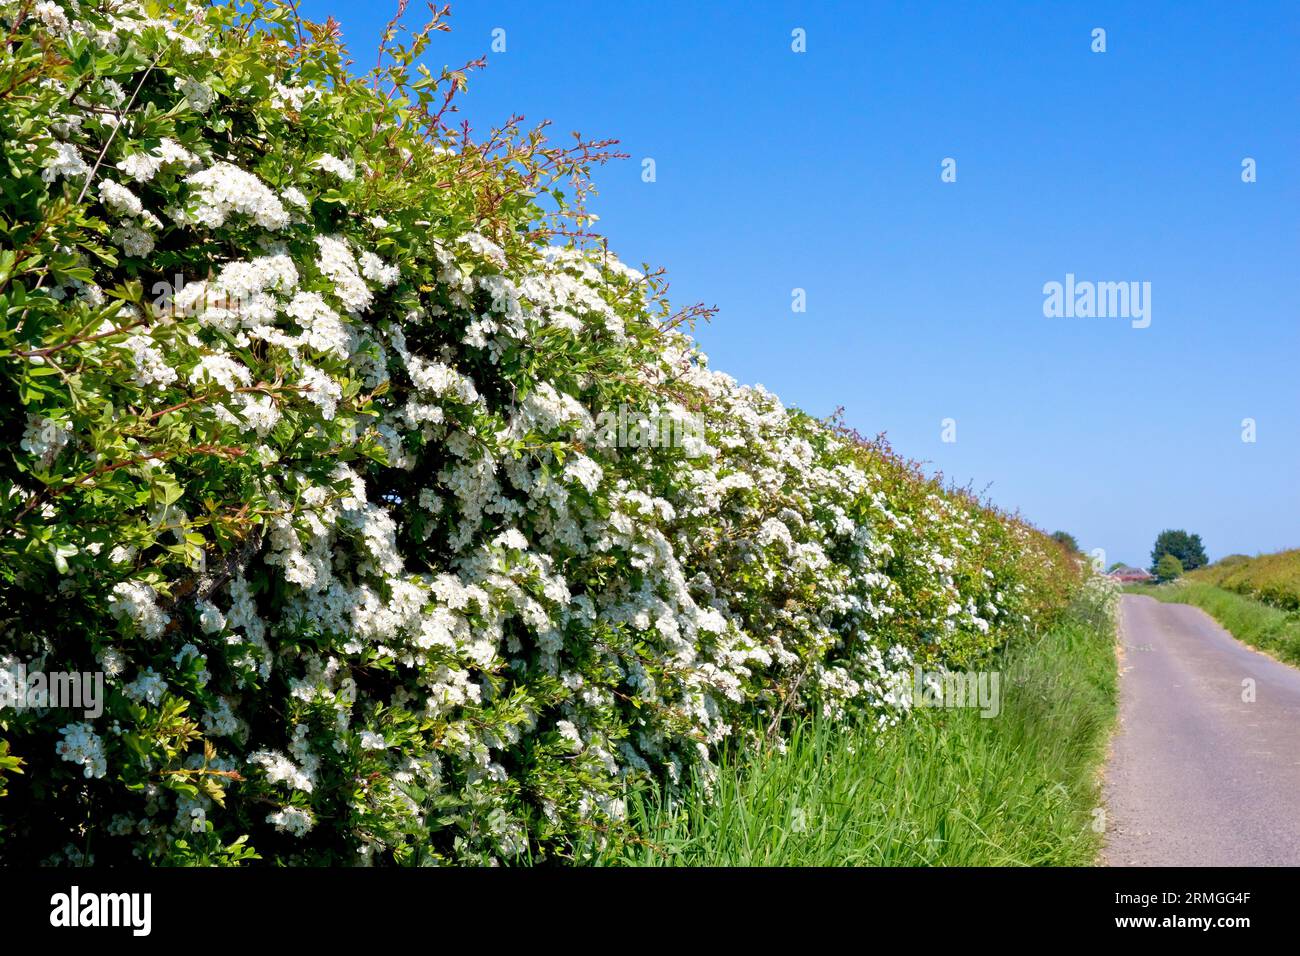 A hedgerow of Hawthorn, Whitethorn or May Tree (crataegus monogyna) in flower alongside a deserted country road or lane. Stock Photo